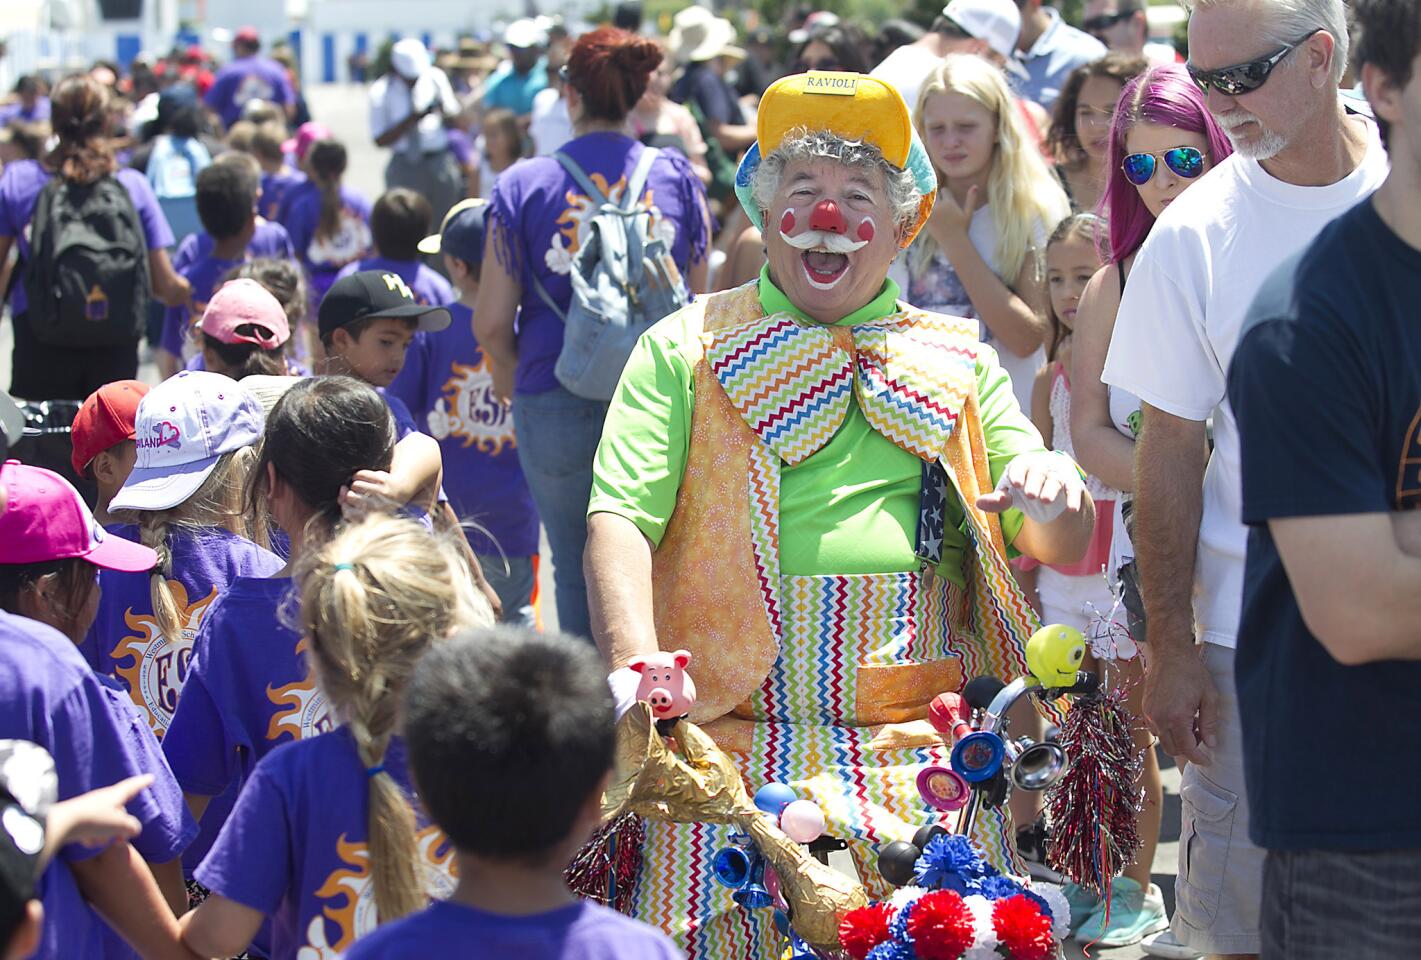 Ravioli the clown greets kids from a Westminster summer camp as they get in line to attend the OC Fair on Thursday.